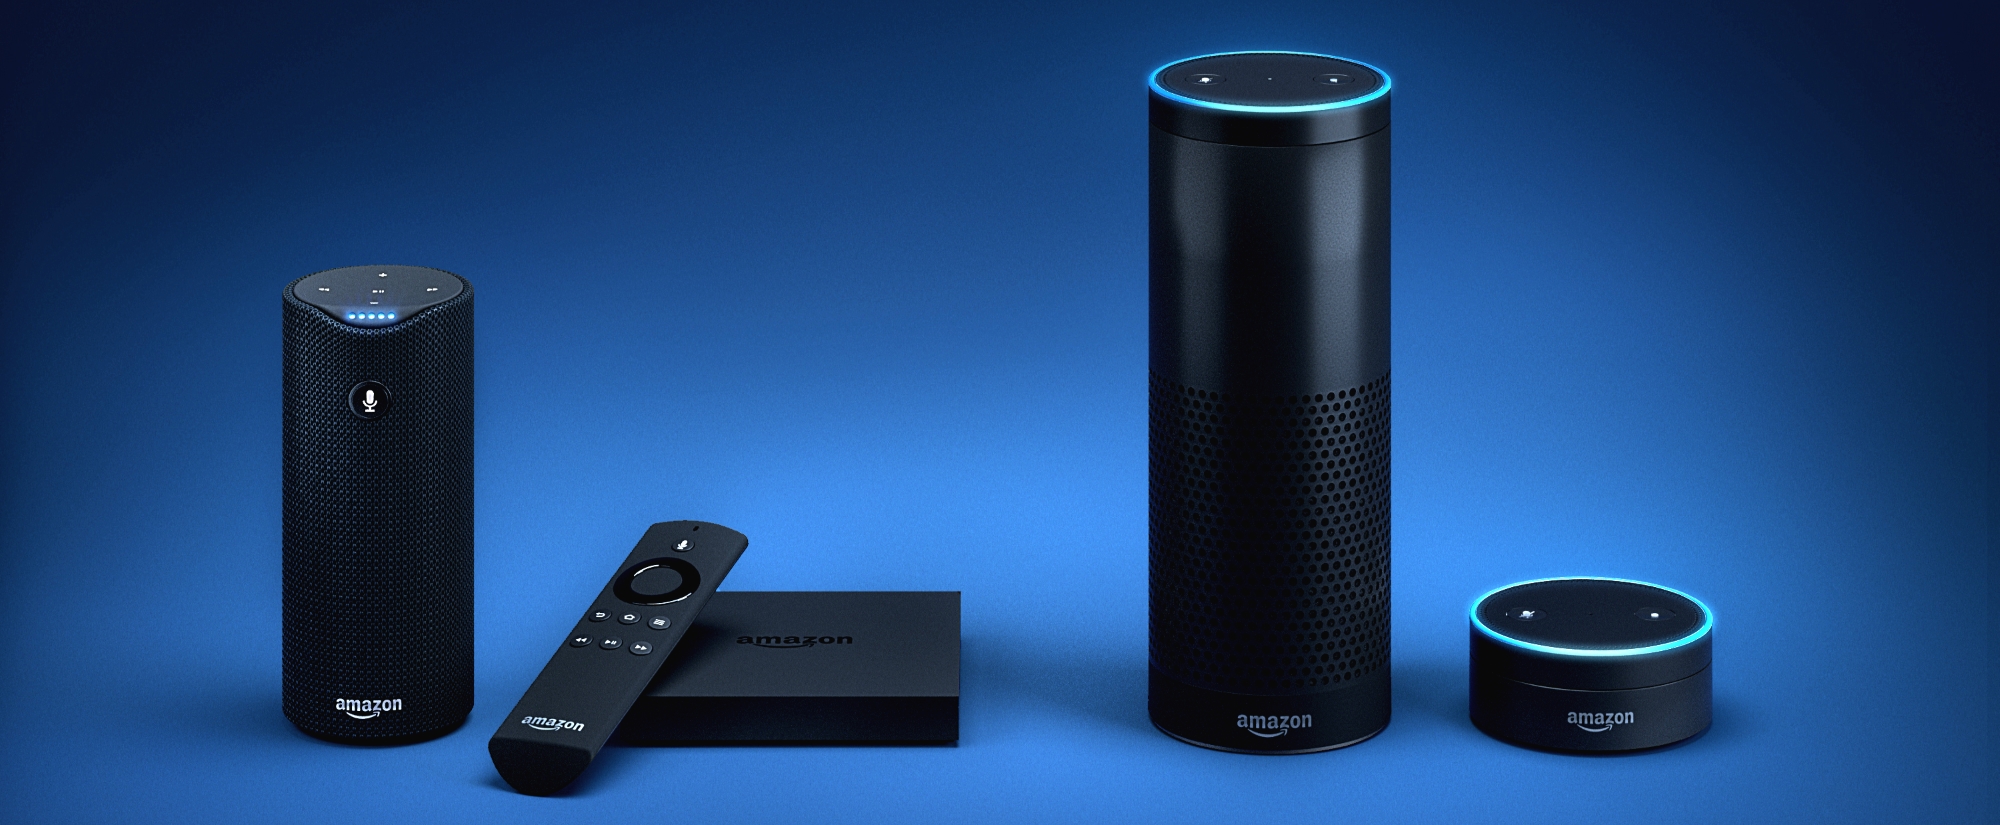 Amazon Extends Echo Range with Dot and Tap